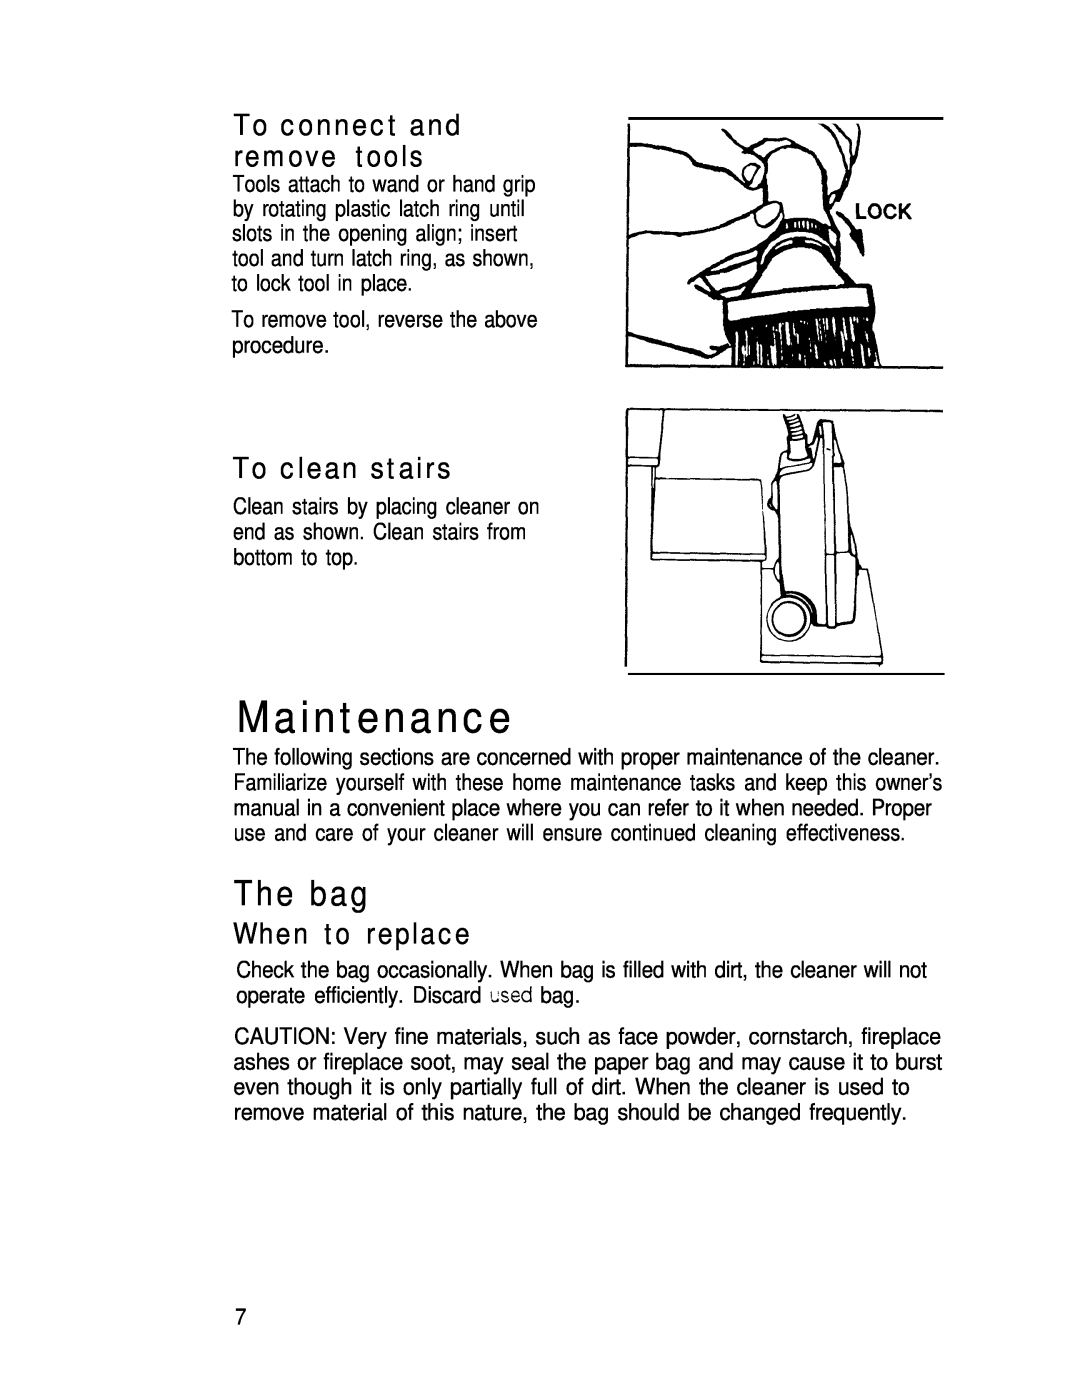 Hoover S3617, S3627 manual Maintenance, The bag, To clean stairs, When to replace, To connect and remove tools 